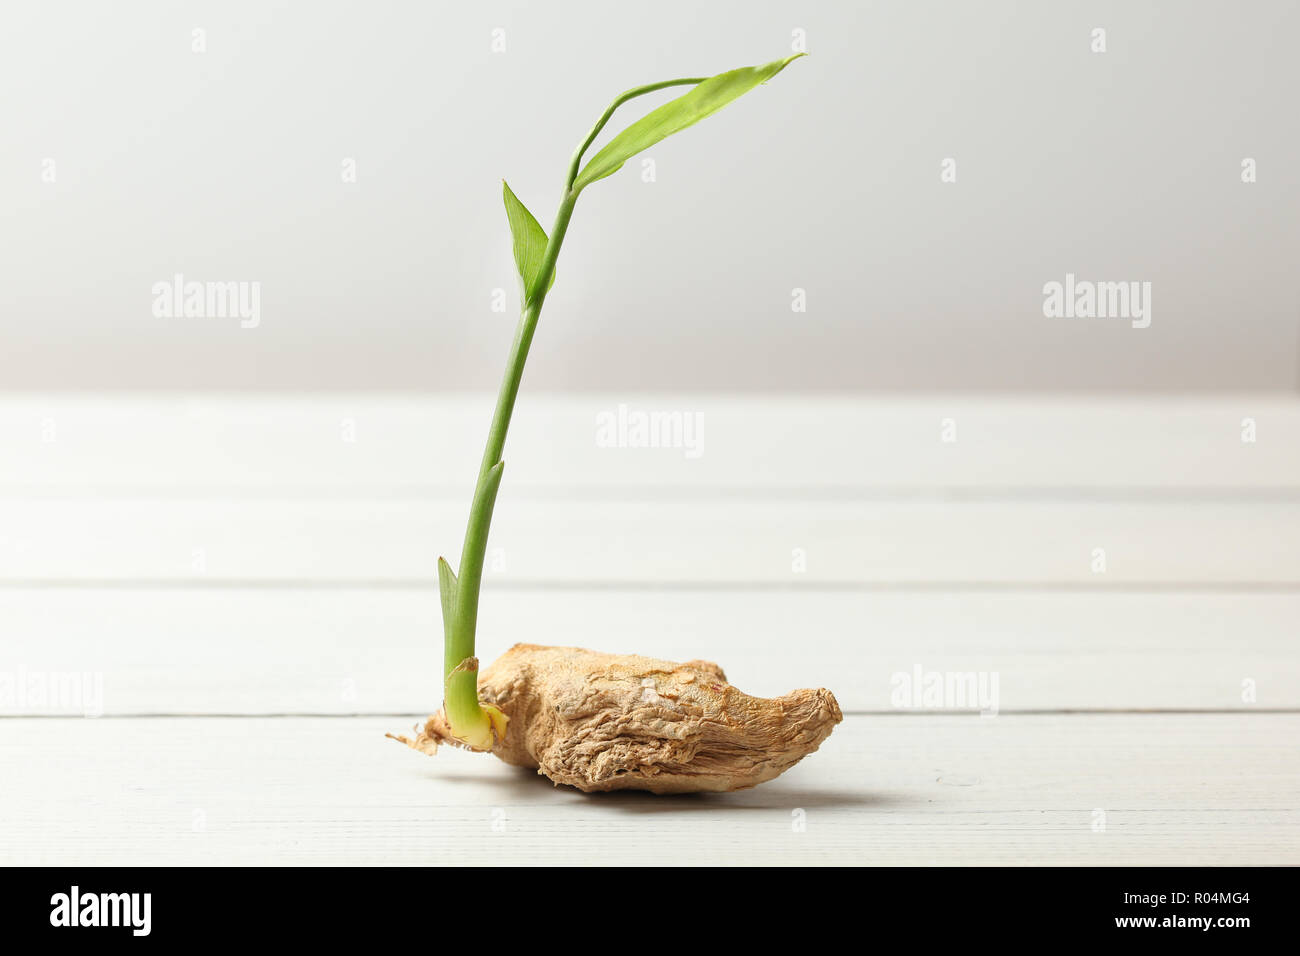 Dry ginger (Zingiber officinale) root with green sprout, on white boards and background. Stock Photo